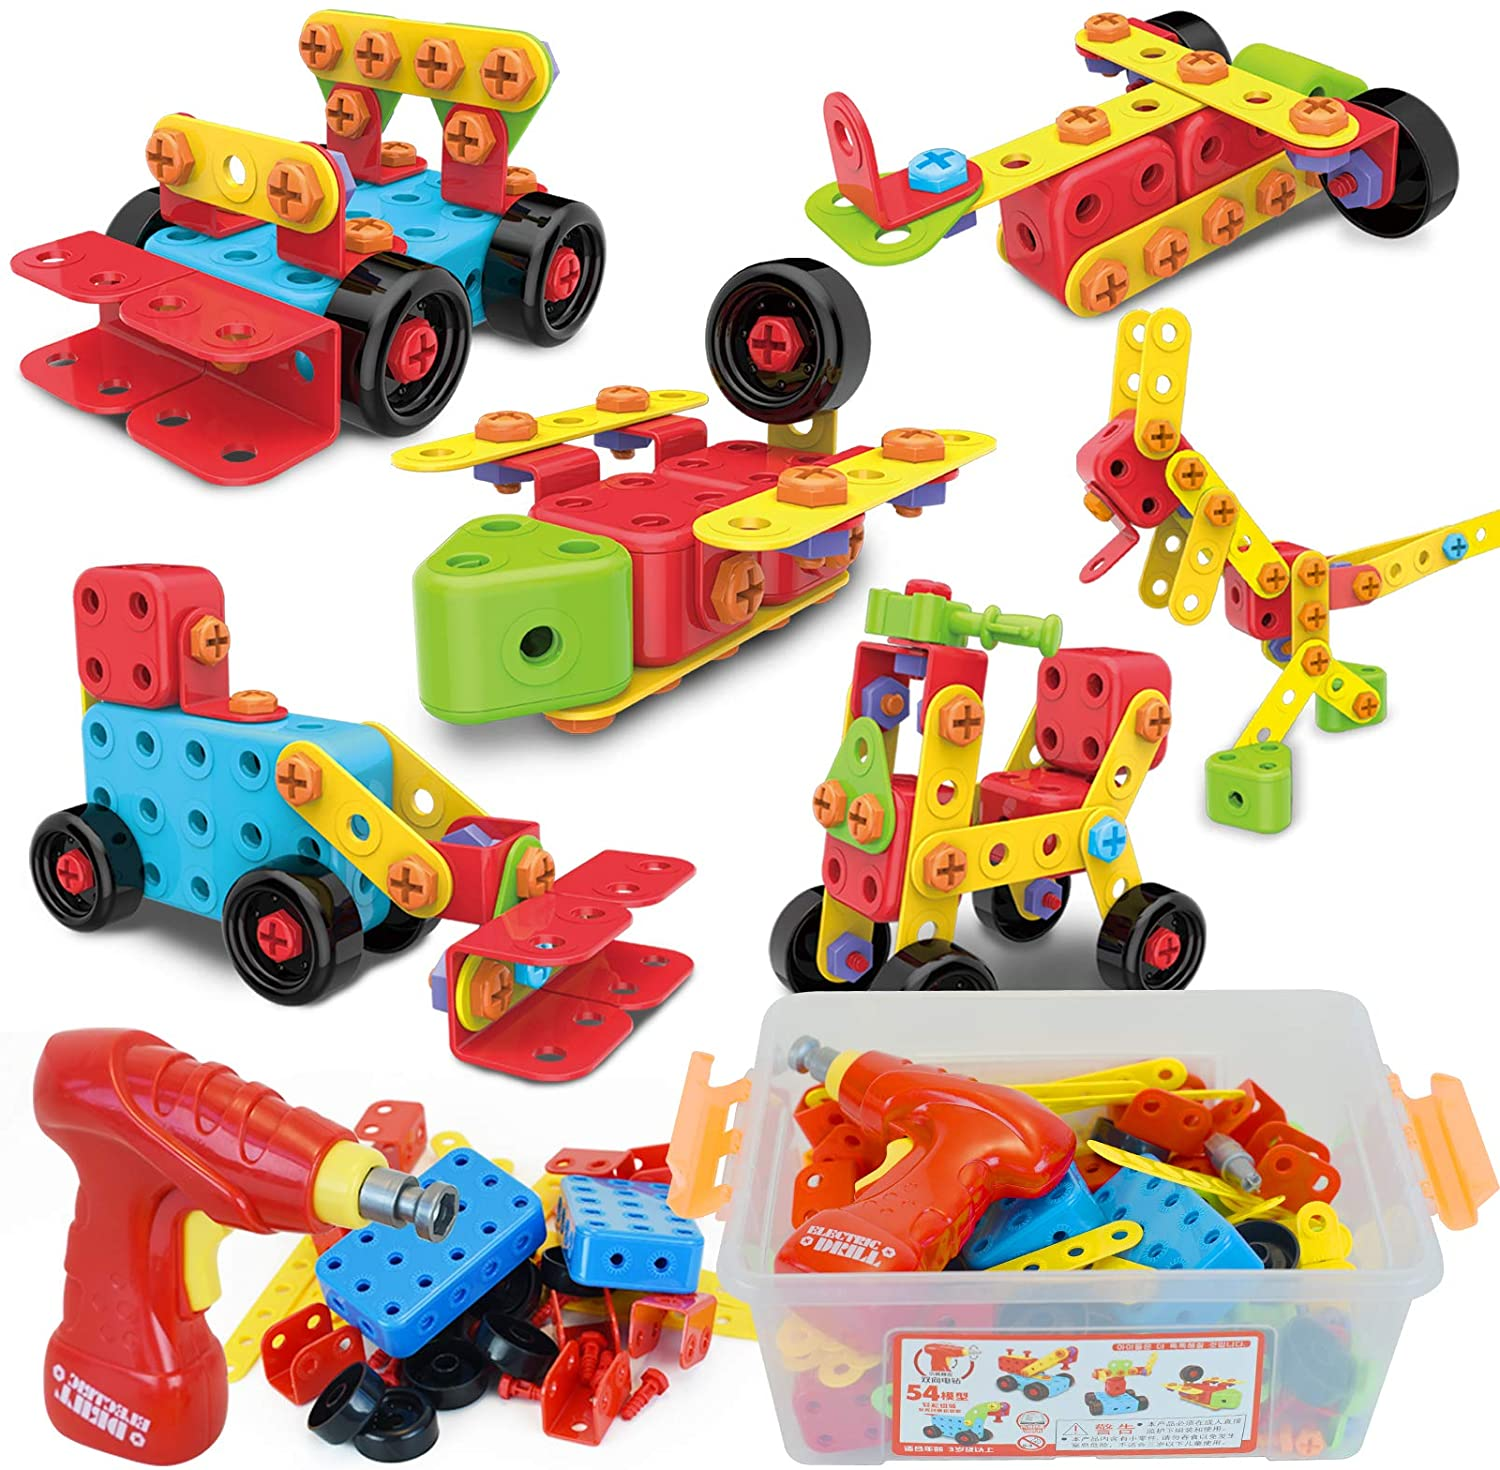 Creative Learning Educational Toys Kids Age 3-8 Years Old Boys Girls FREE SHIP 